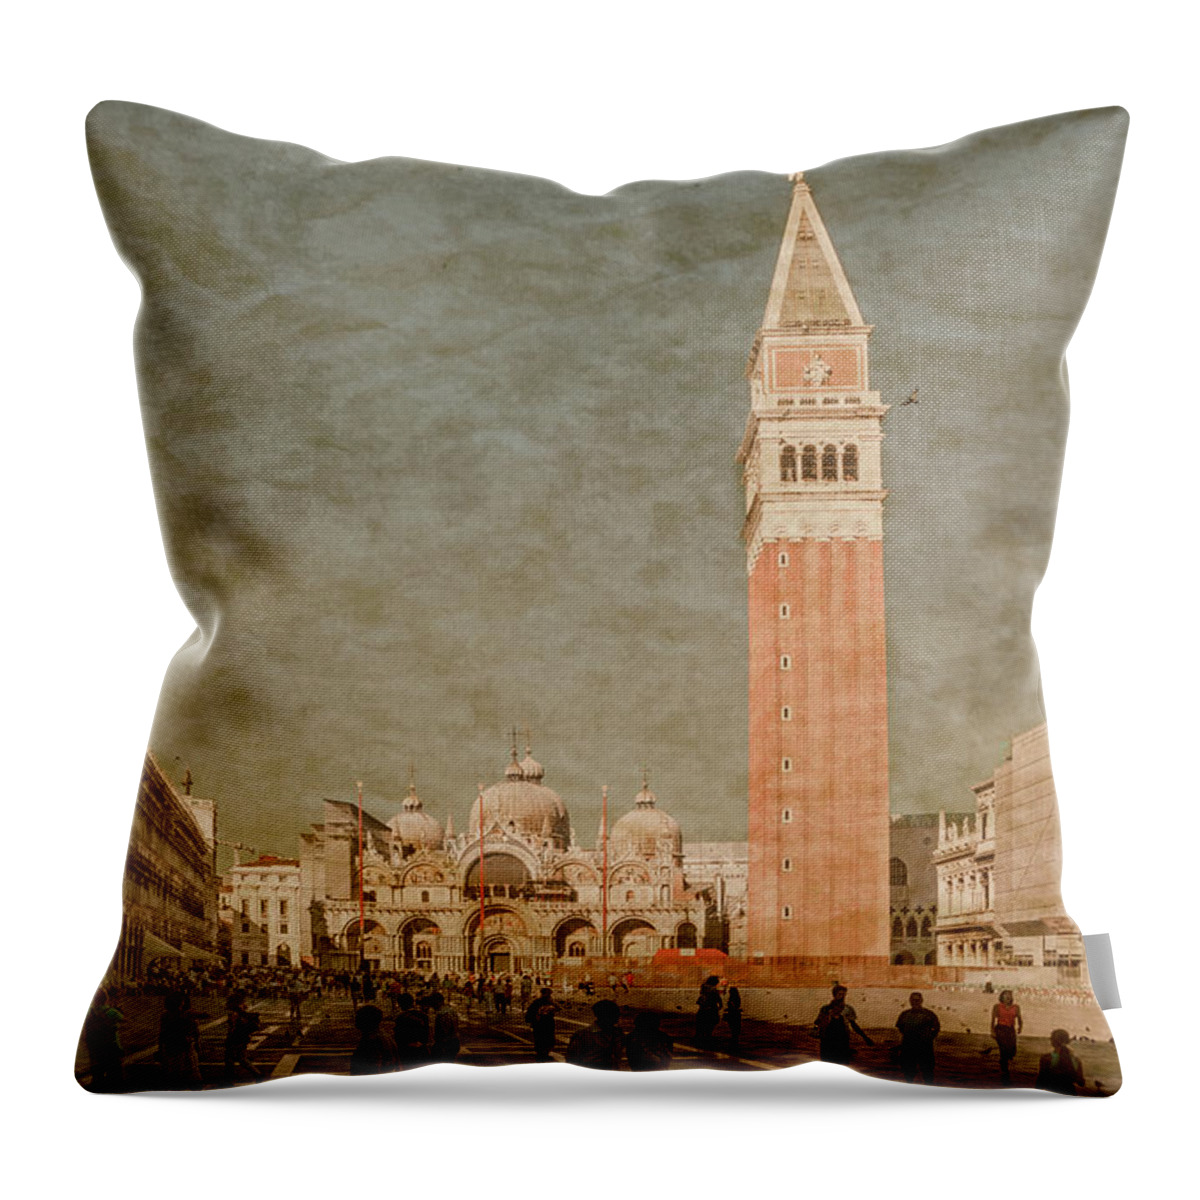 Venice Throw Pillow featuring the photograph Venice, Italy - Piazza San Marco by Mark Forte